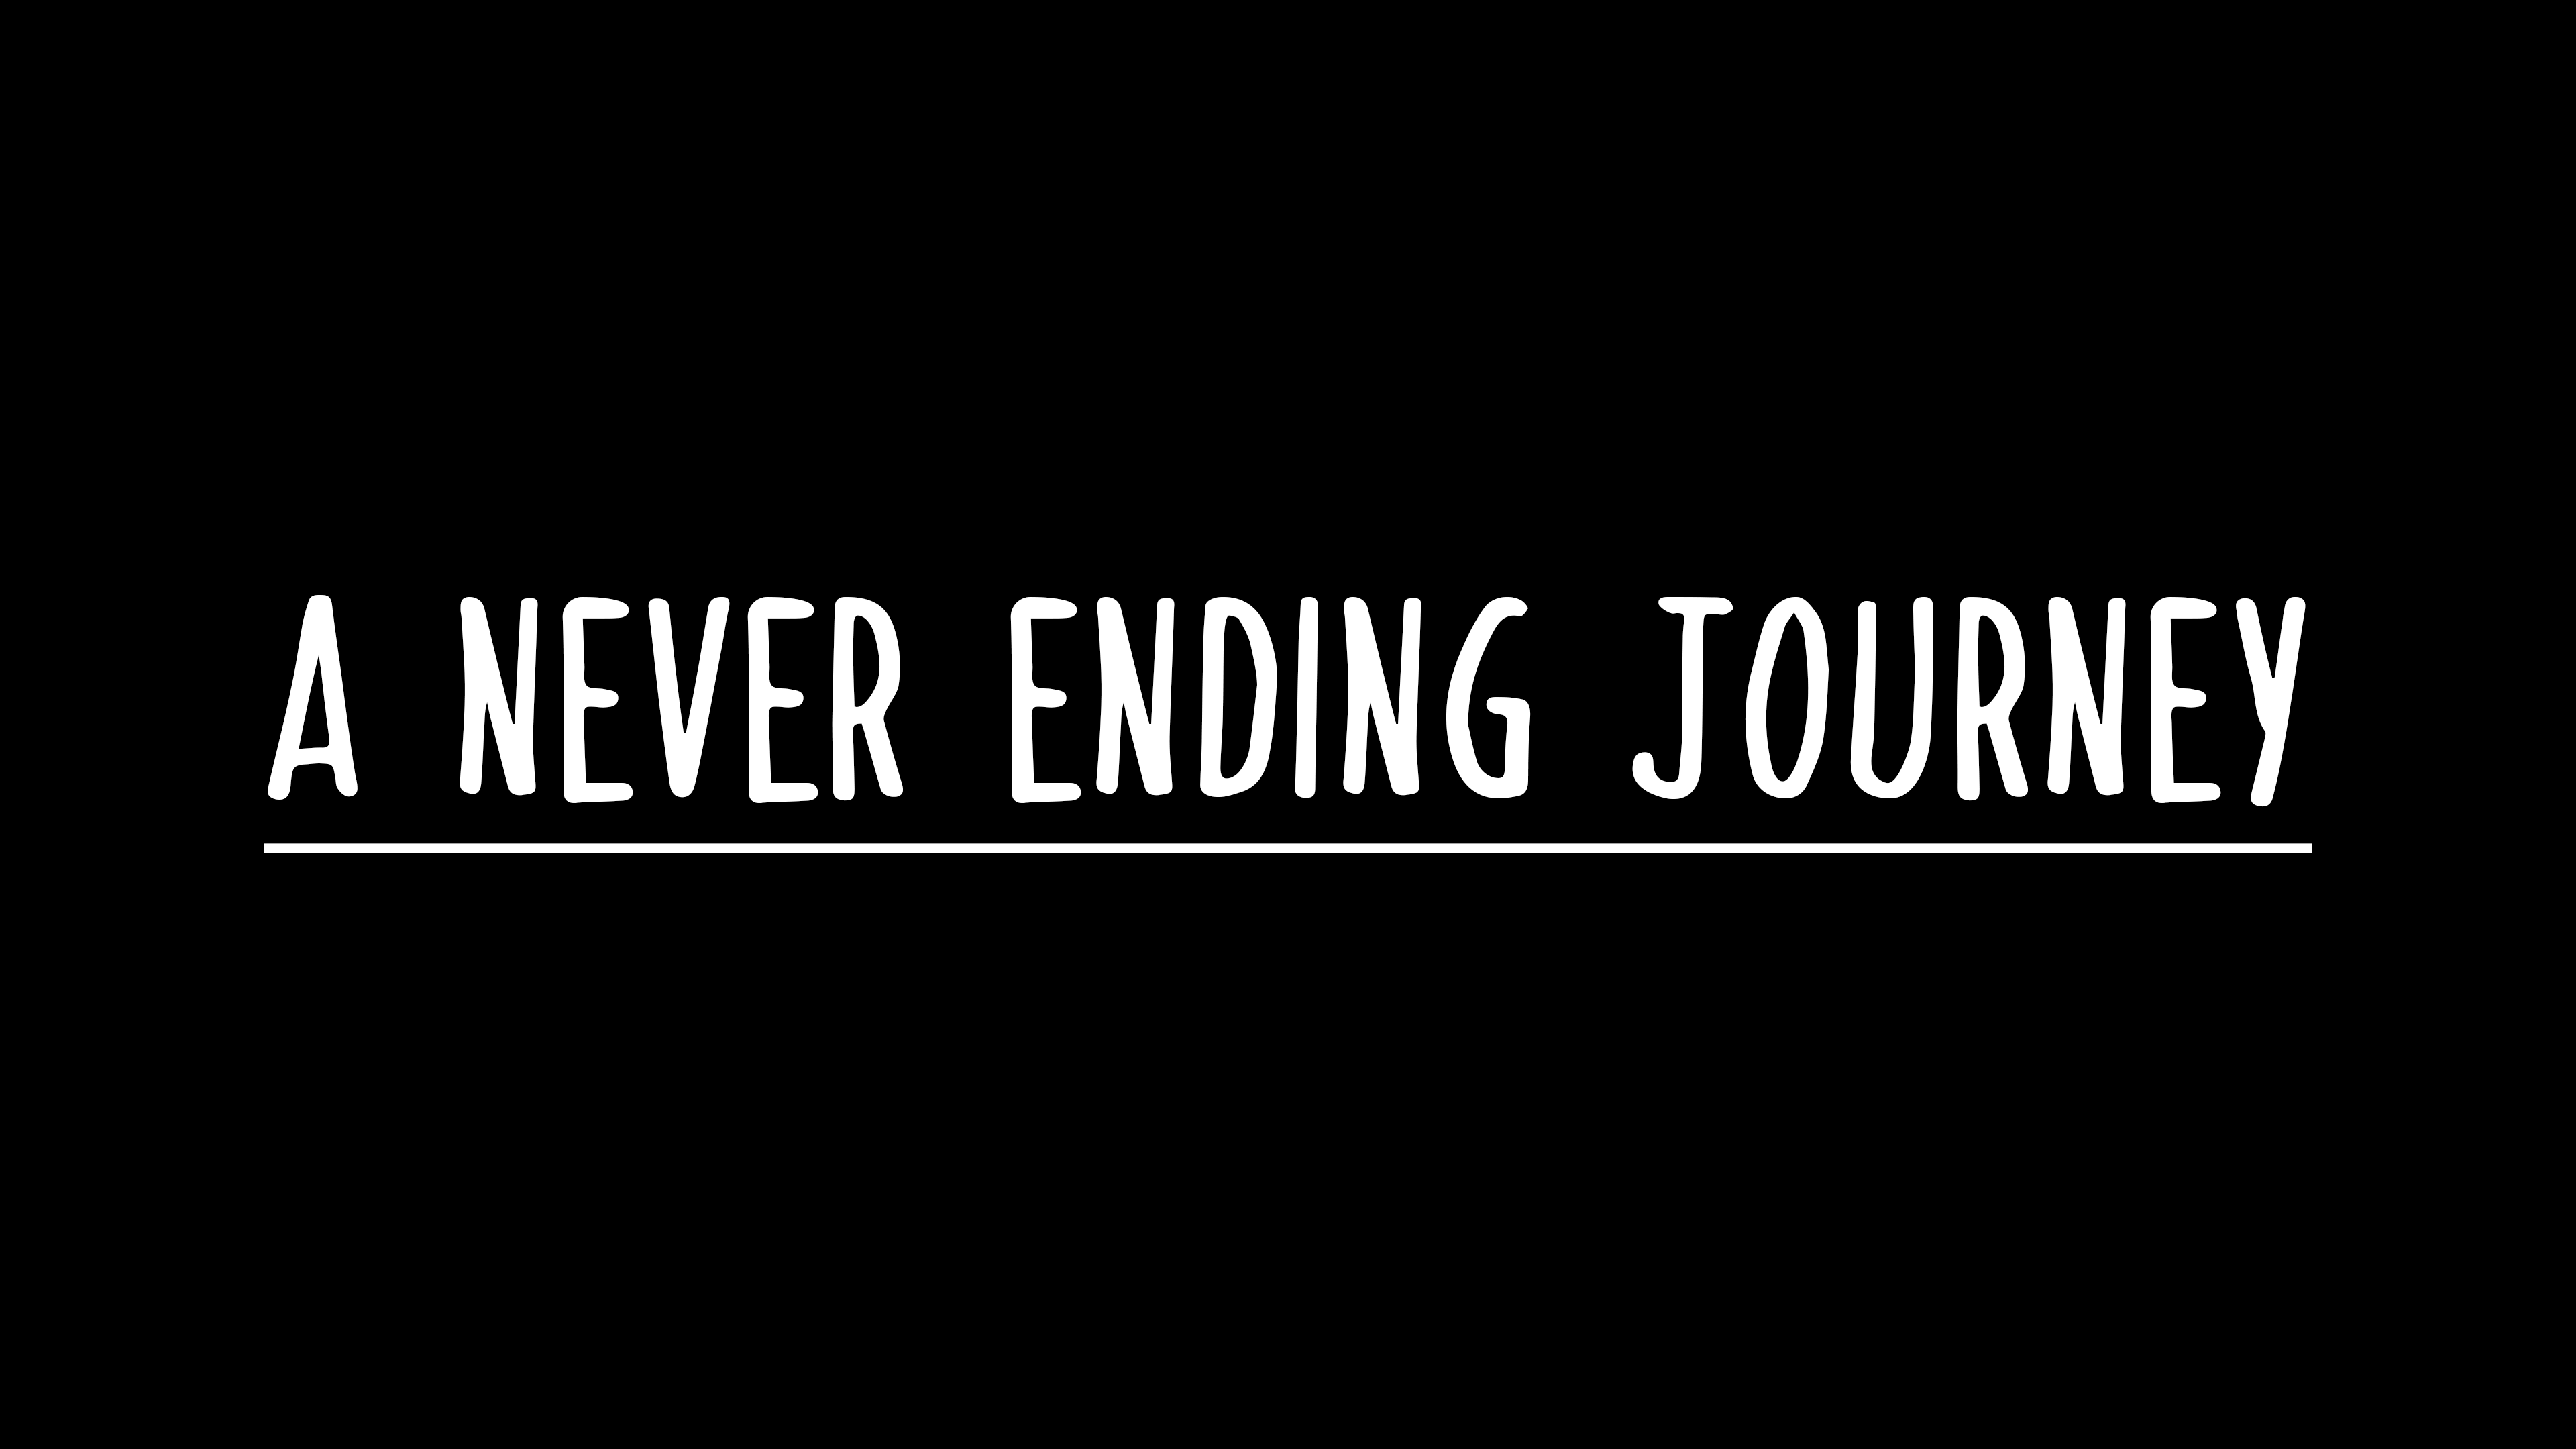 A Never Ending Journey